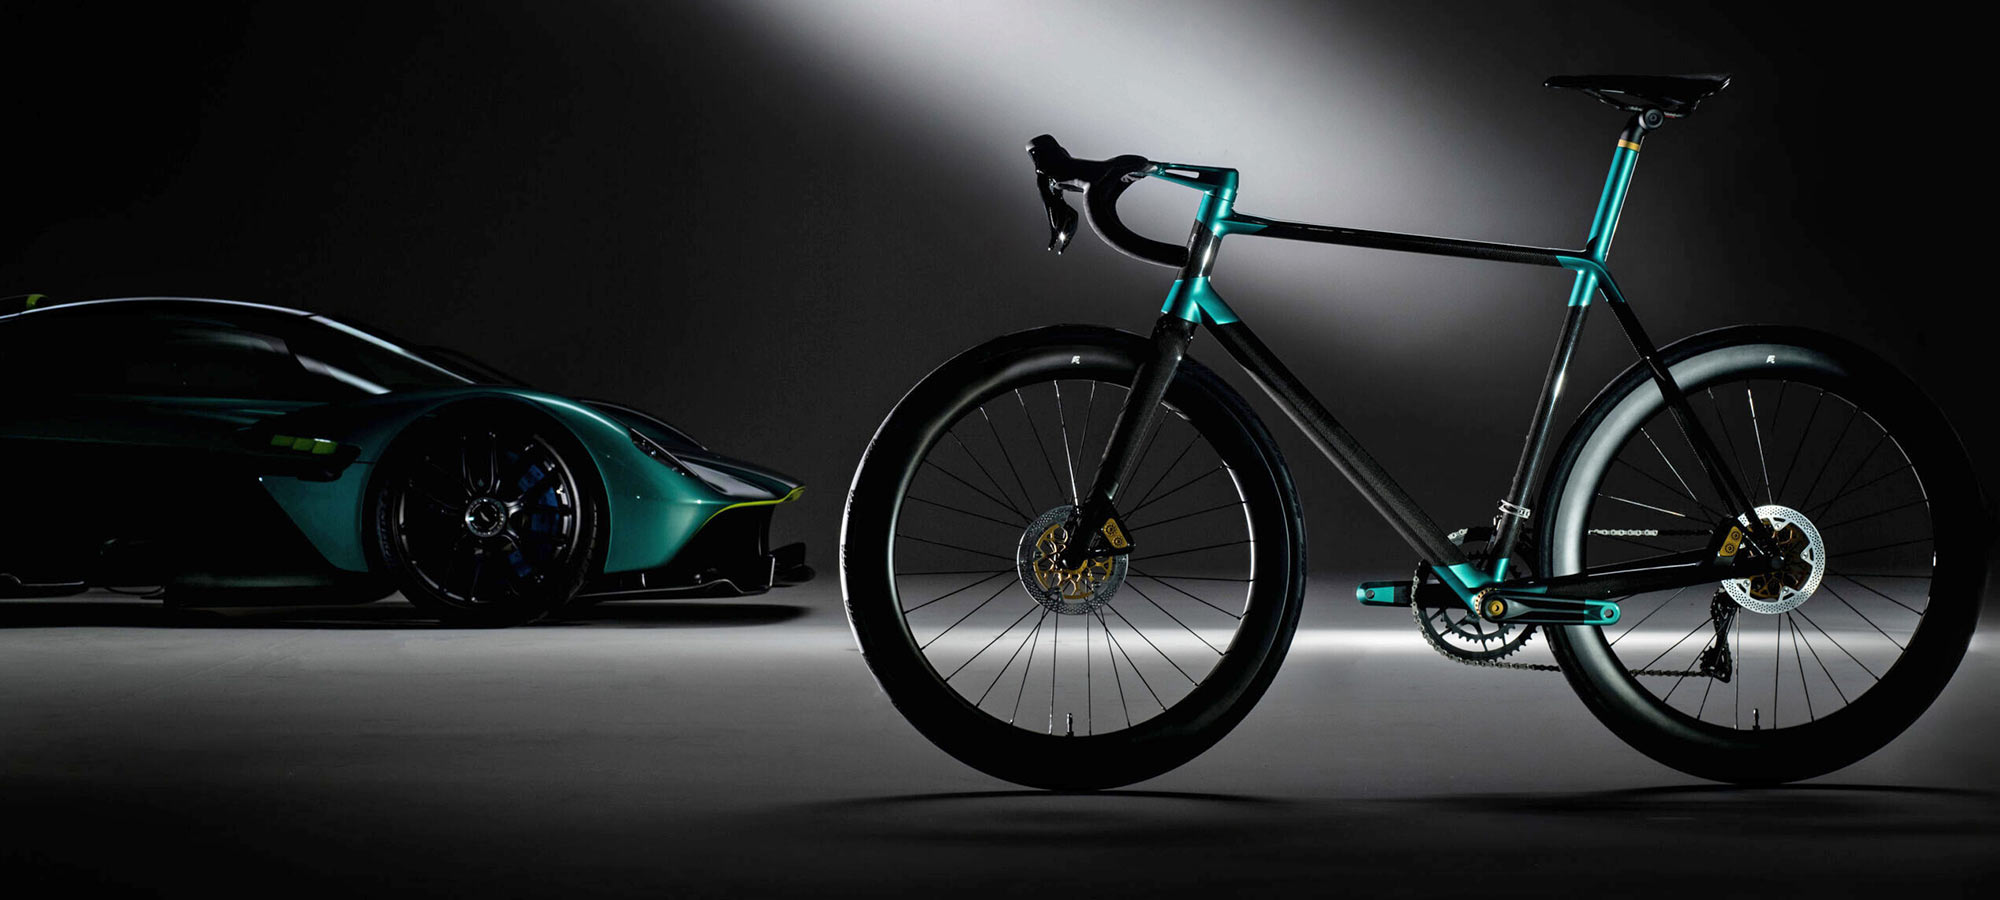 J-Laverack Aston Martin .1R bespoke carbon & titanium road bike, made in the UK, luxury custom and fully integrated, matchy-macty with your supercar